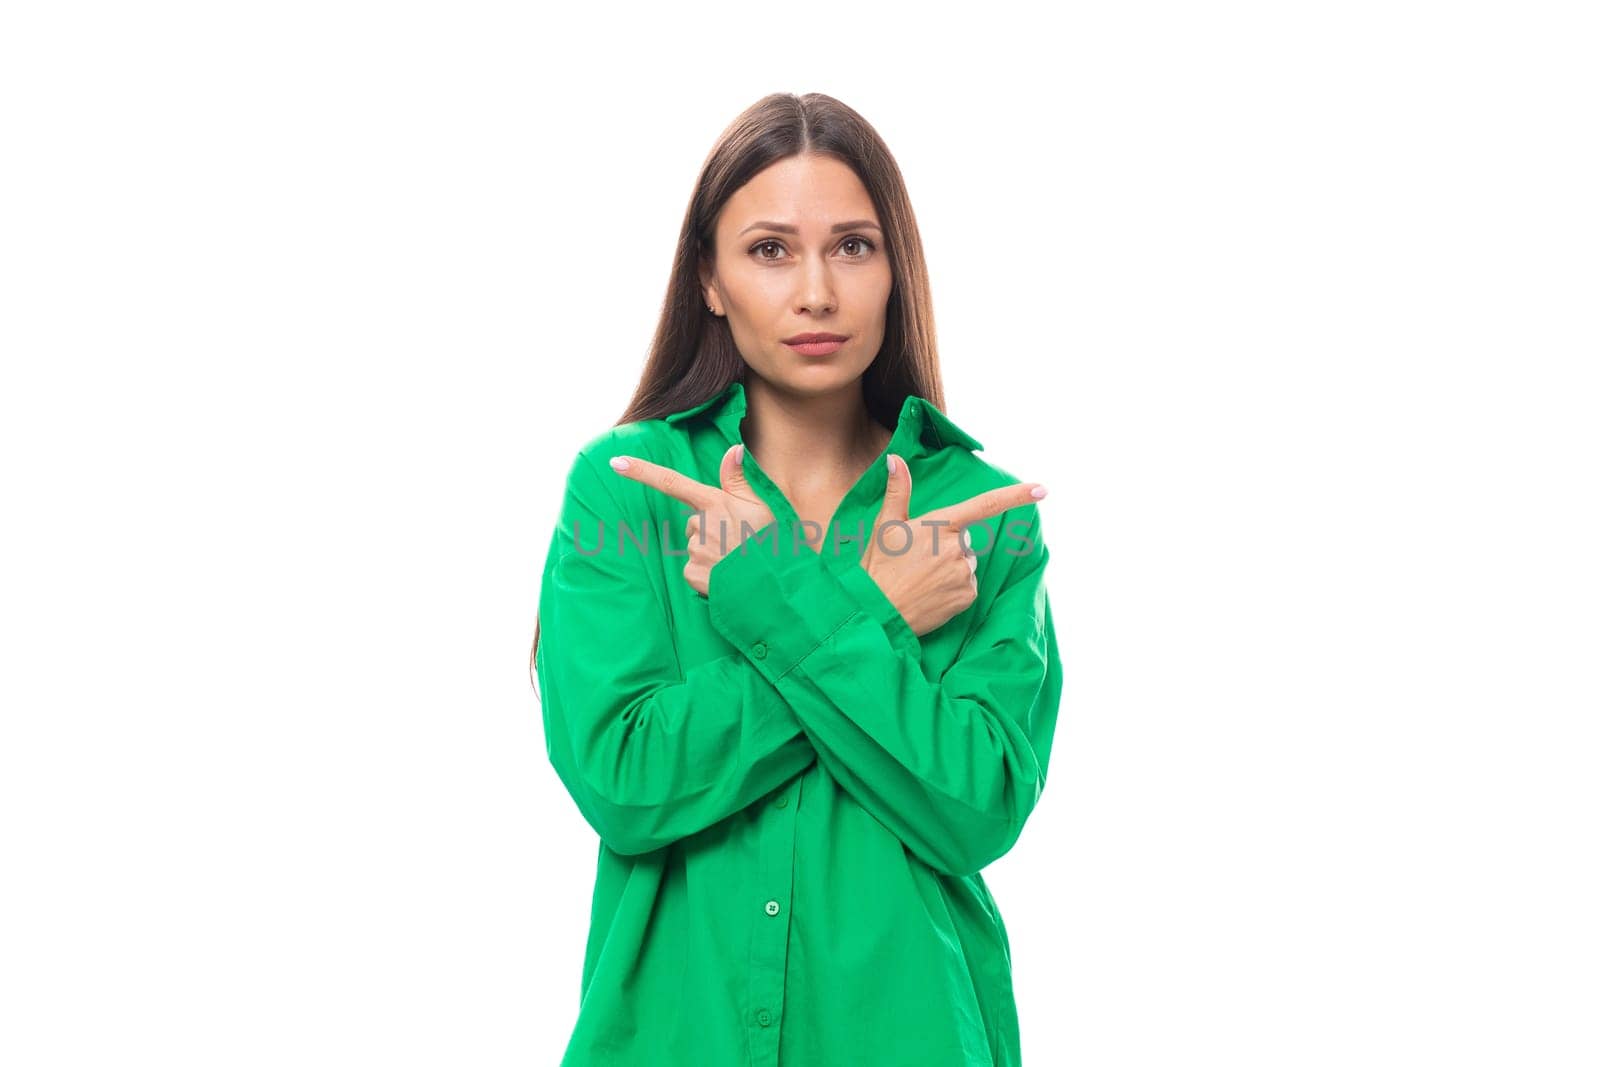 young european female model with well-groomed black hair and make-up dressed in a green shirt crossed her arms in front of her on a white background with copy space.